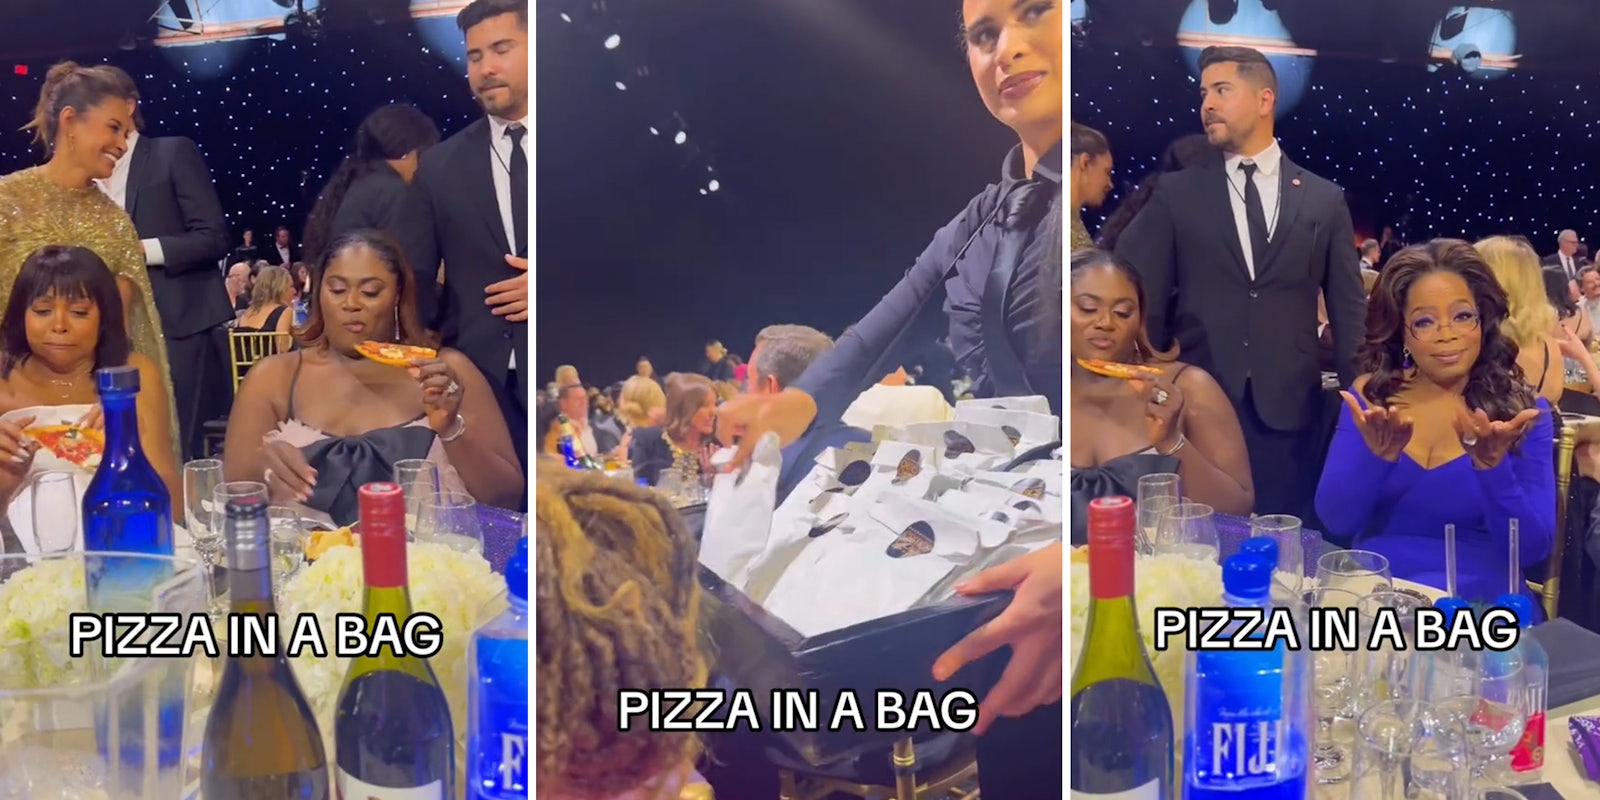 People are shocked Oprah was served pizza in a bag at awards show